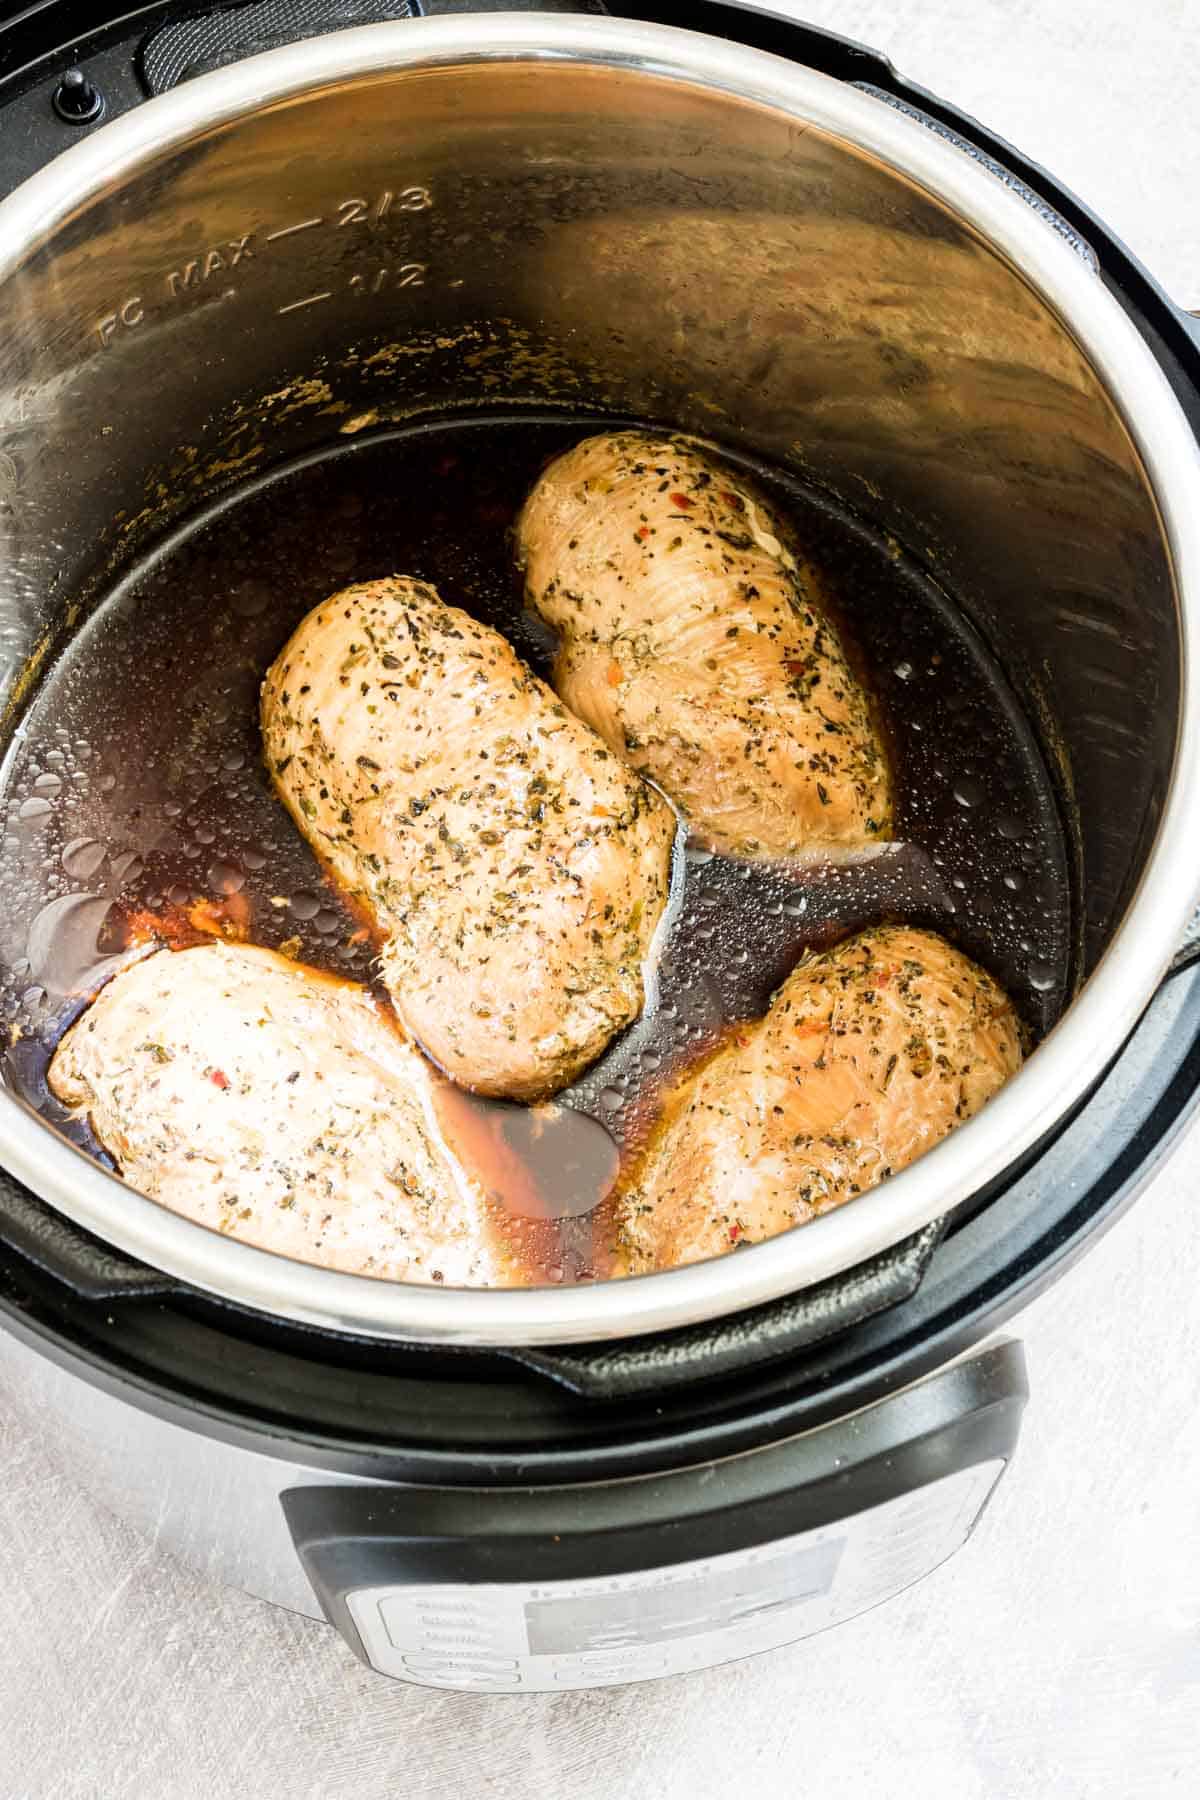 the completed instant pot frozen chicken breast inside the instant pot insert.